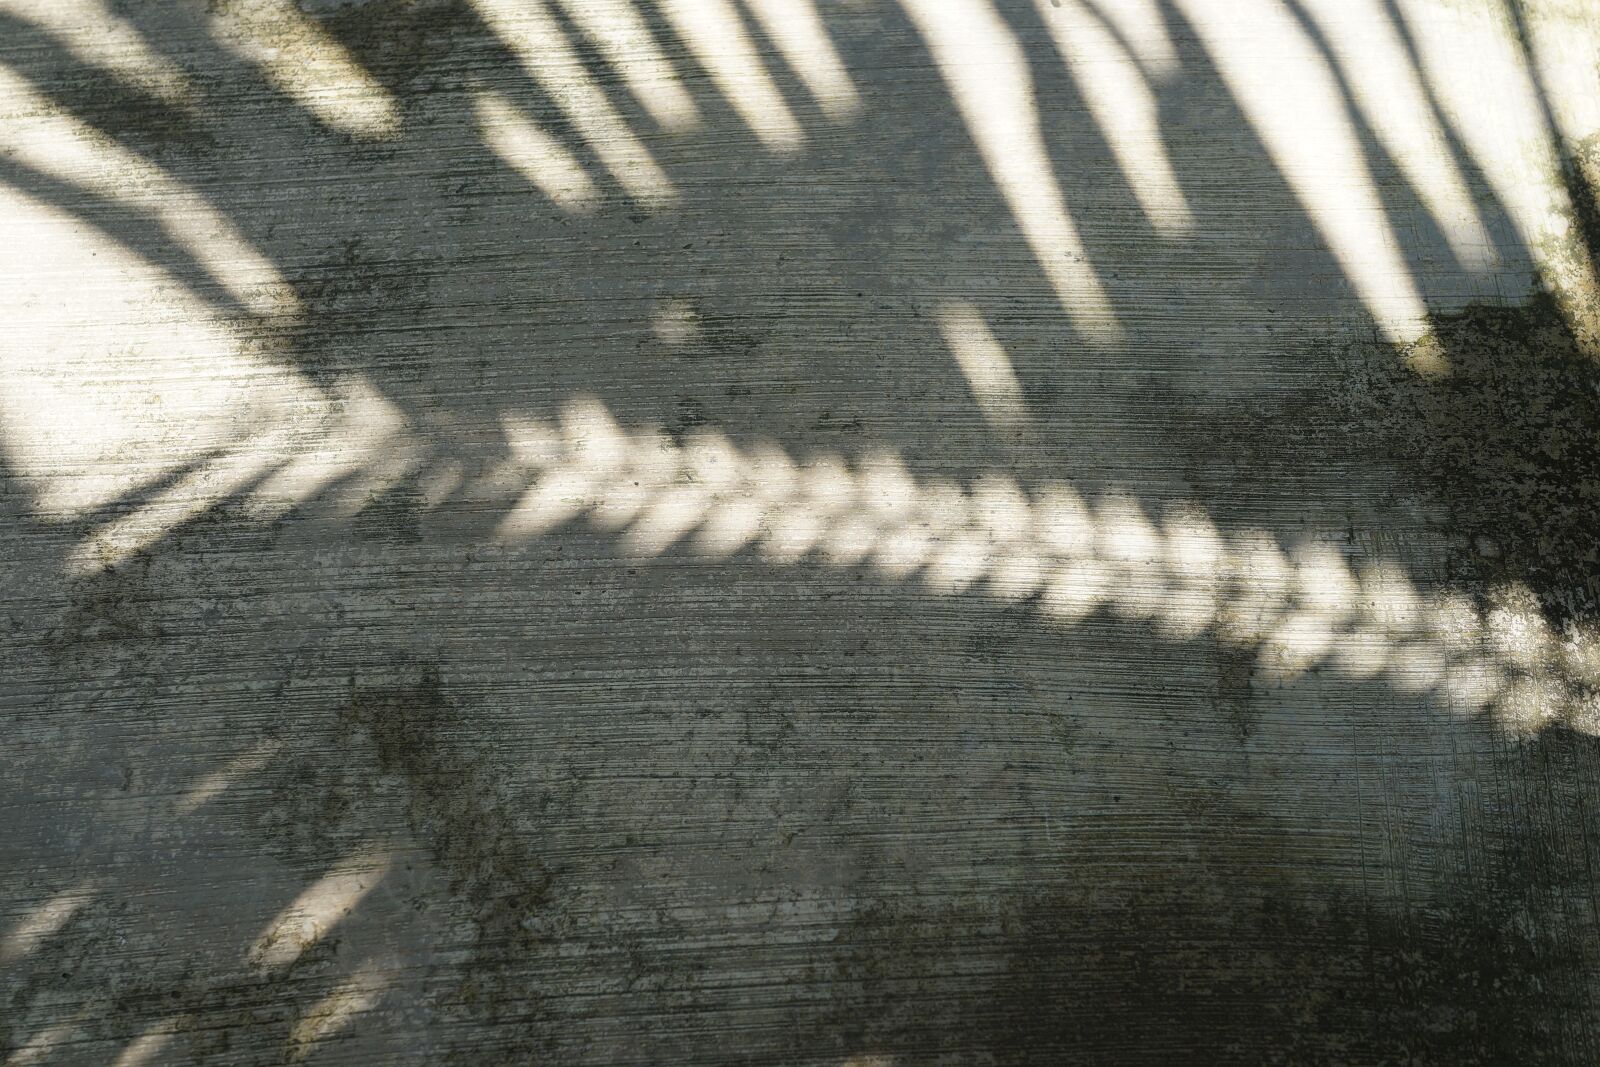 Sony Cyber-shot DSC-RX1R sample photo. Shadows, cemented walkway, abstract photography